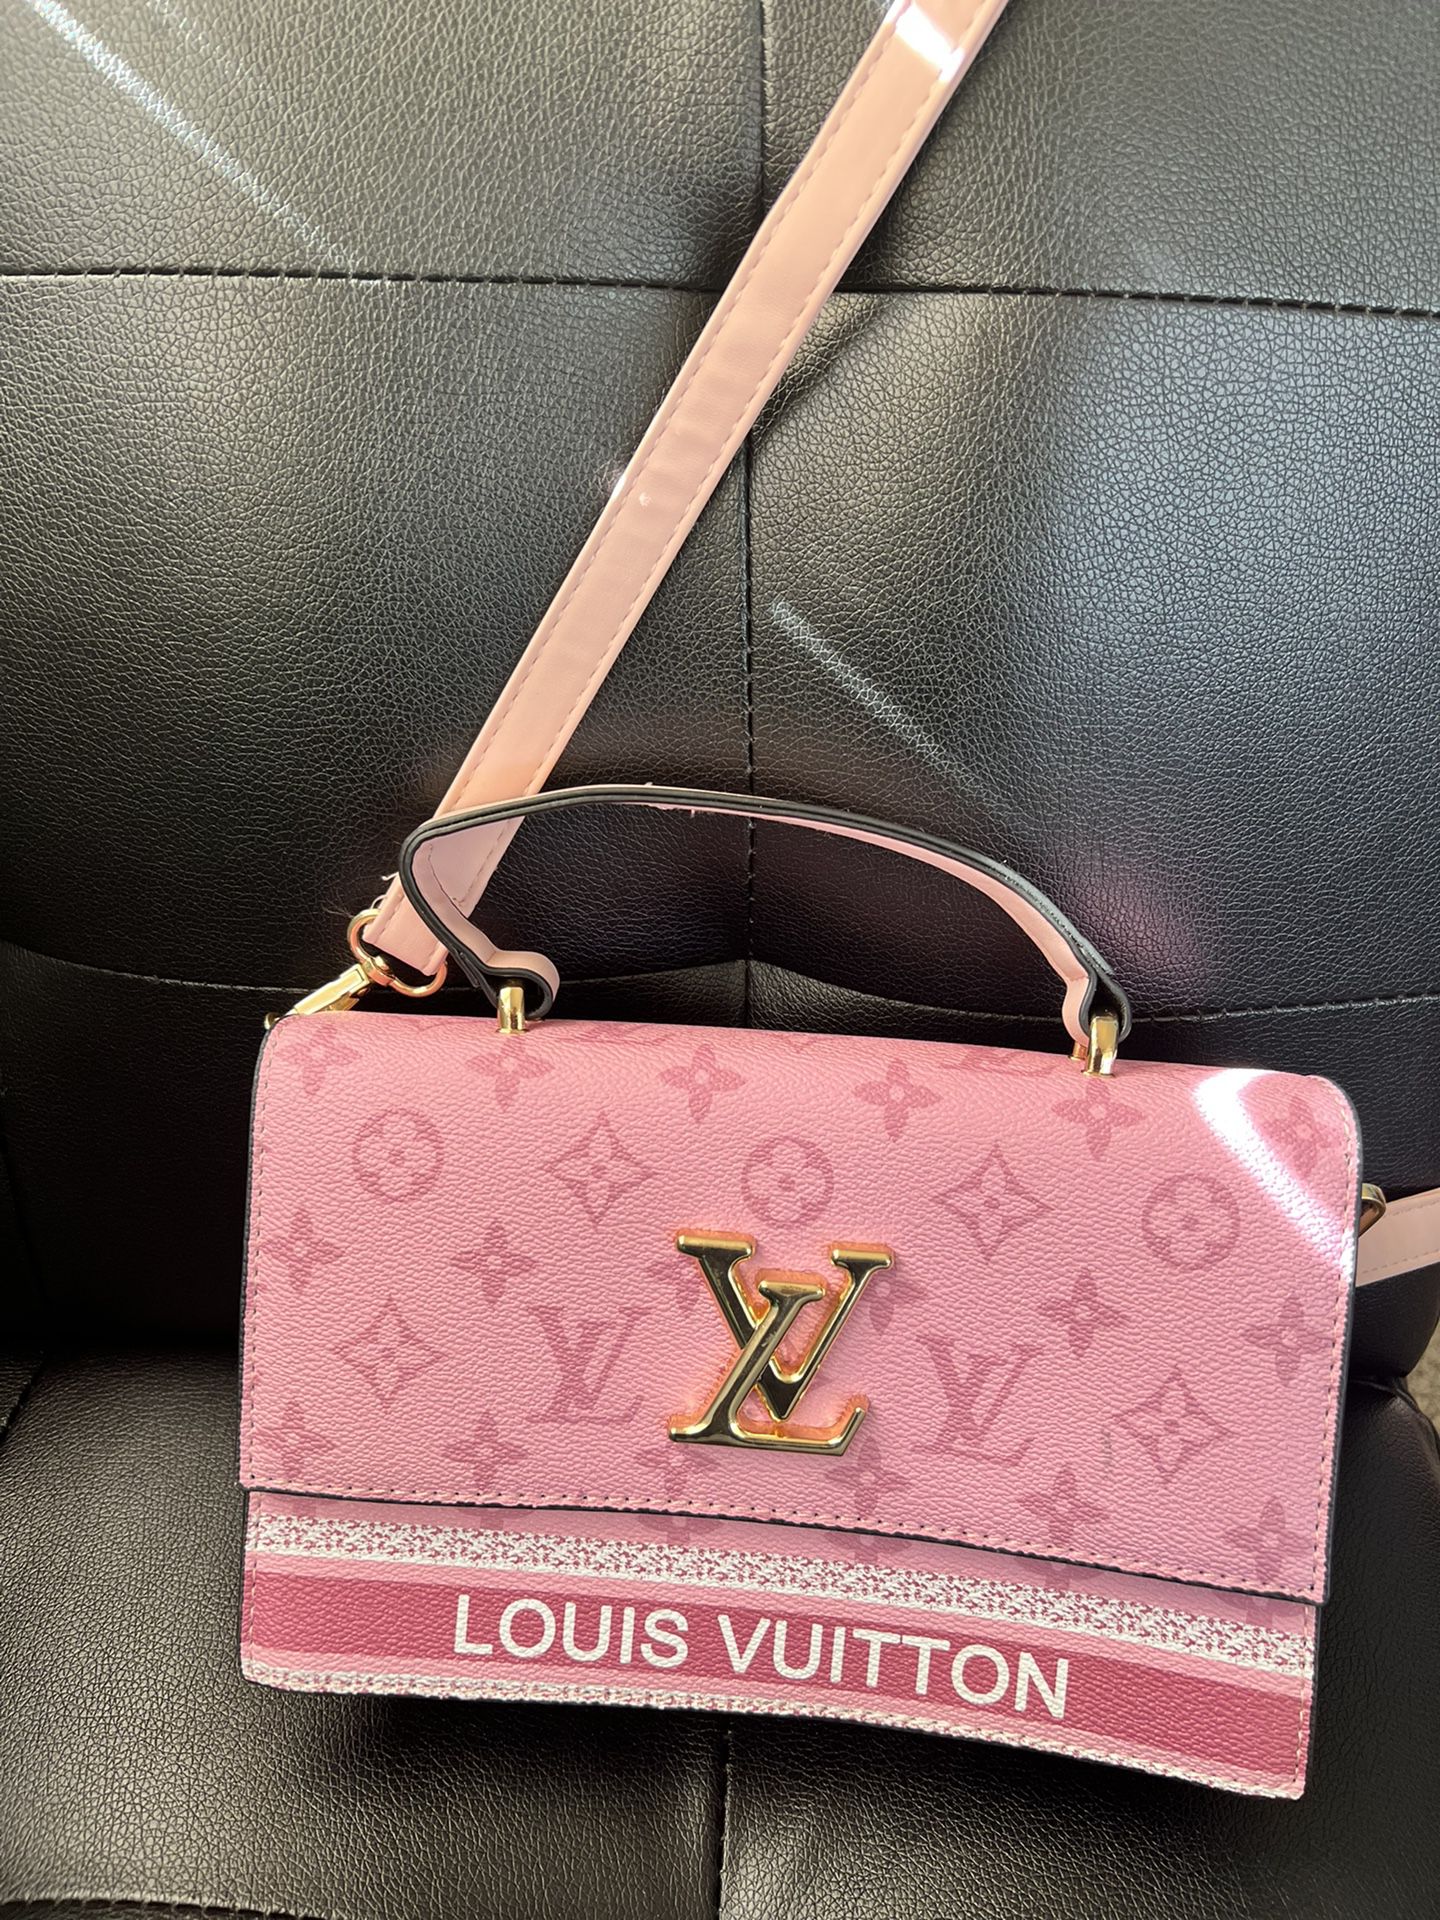 Knock Of Purses & Wallet For Sale Brand New for Sale in Ventura, CA